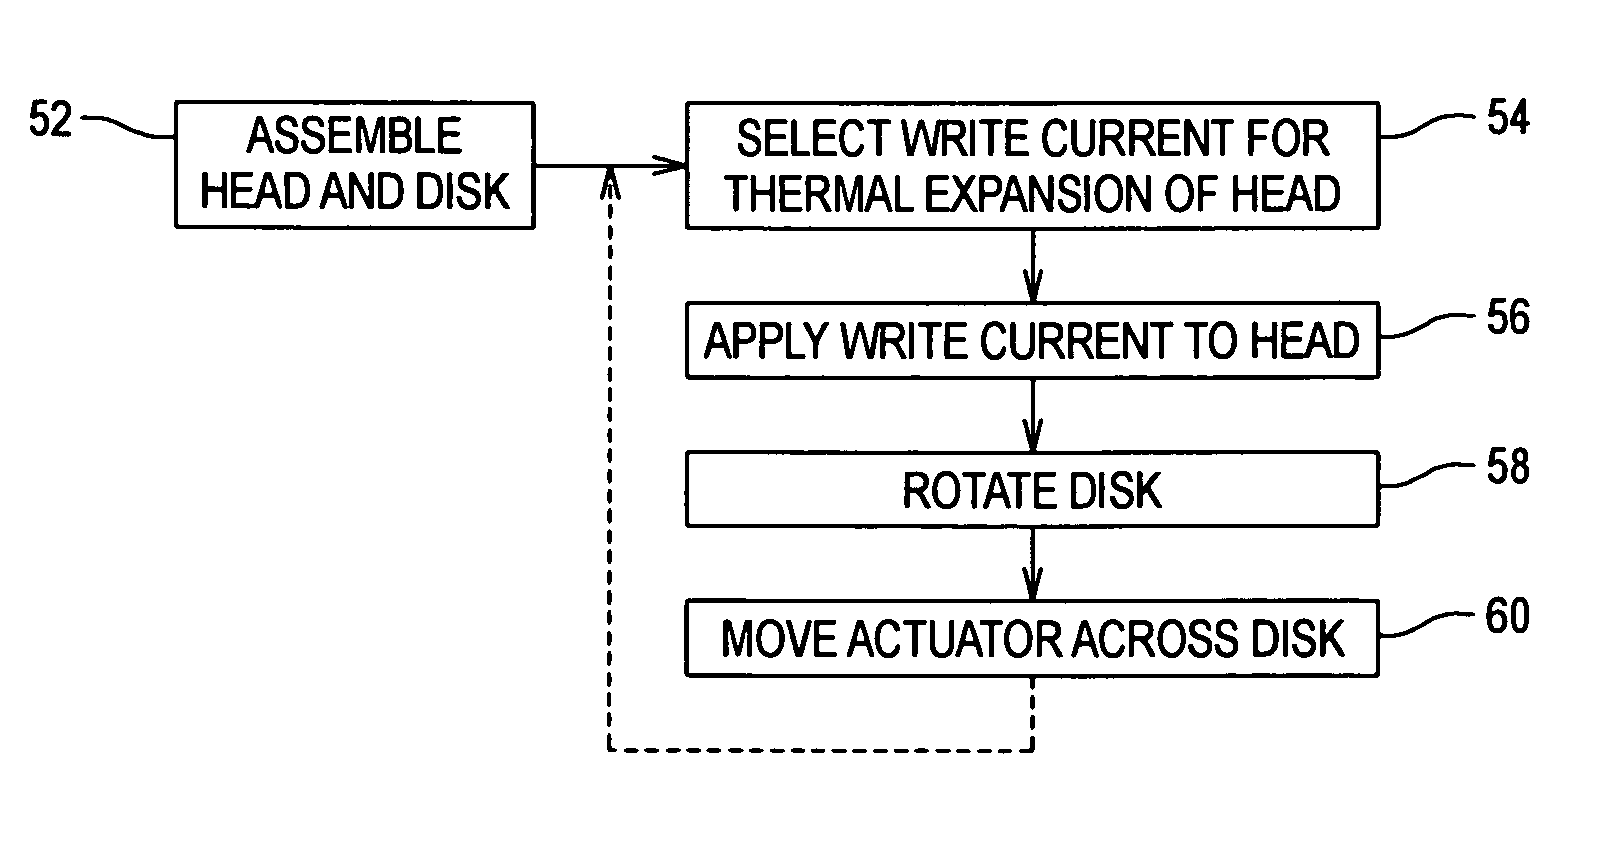 Head-disk interface preconditioning using write current before servo track write